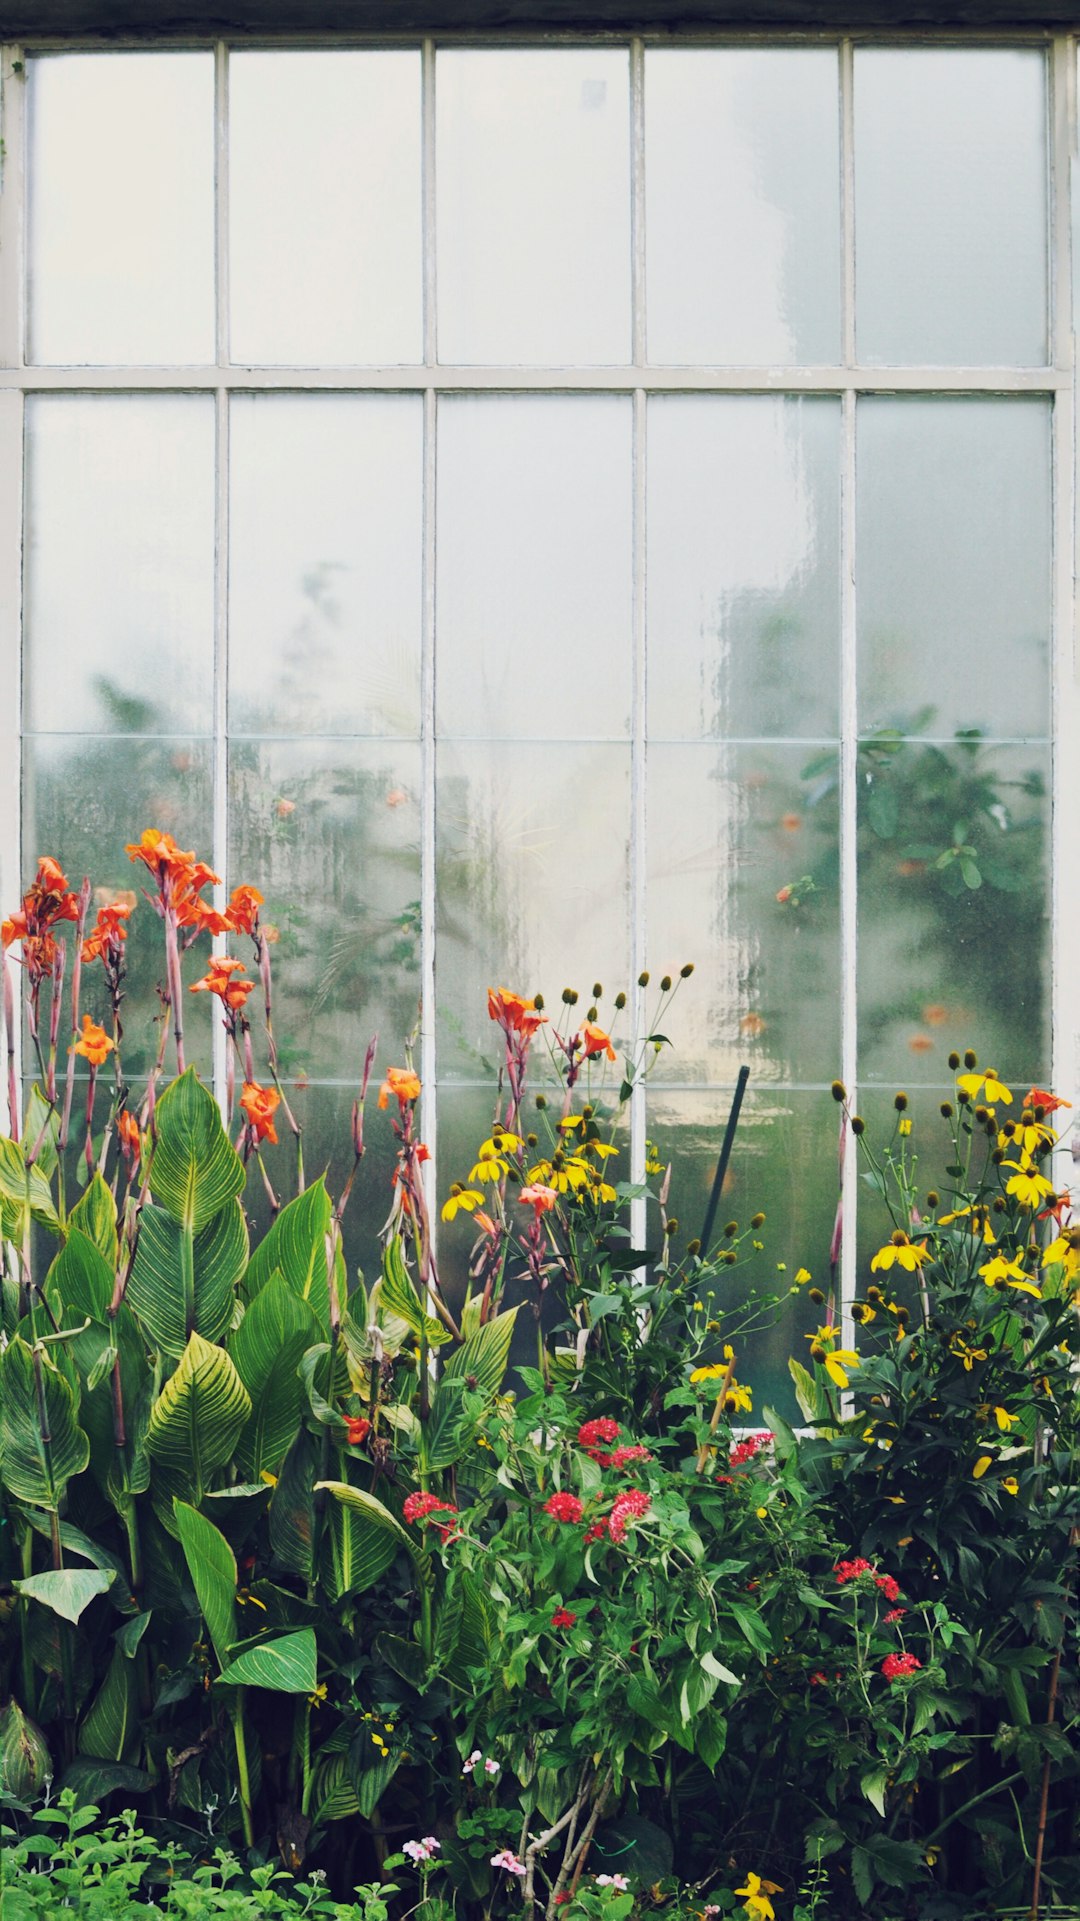 Walking around my local park in the evening I stumbled on this frosted window looking into a greenhouse, I love the blurred texture of the flowers behind the glass.